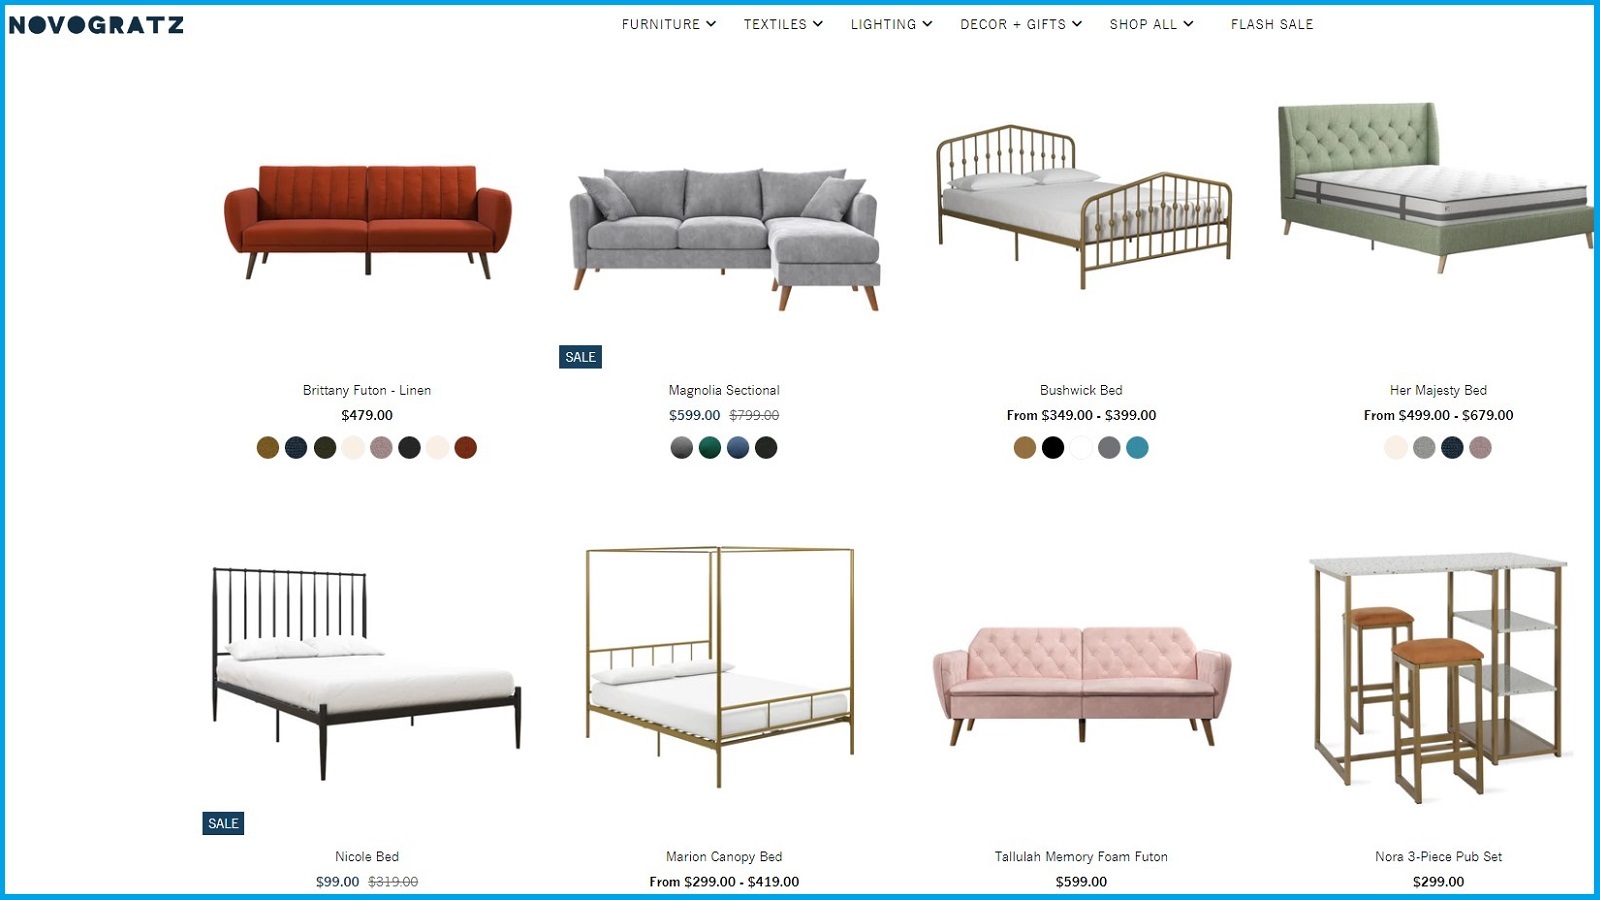 Novogratz Furniture Review: They Are Not Only Famous for Sofas!